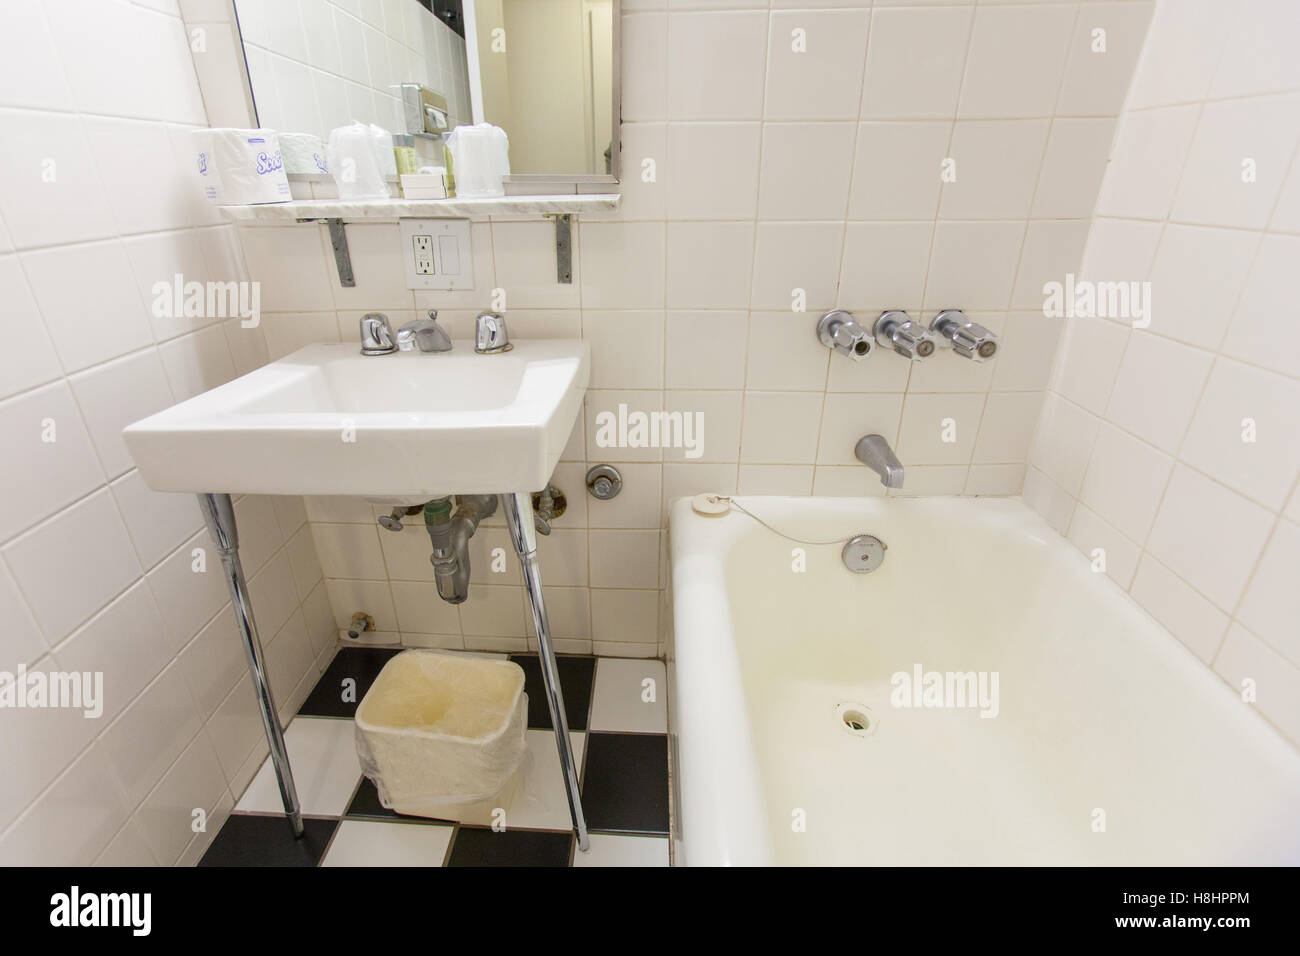 En-suite bathroom at the Hotel Pennsylvania, 7th  Ave, New York City, United States of America. Stock Photo